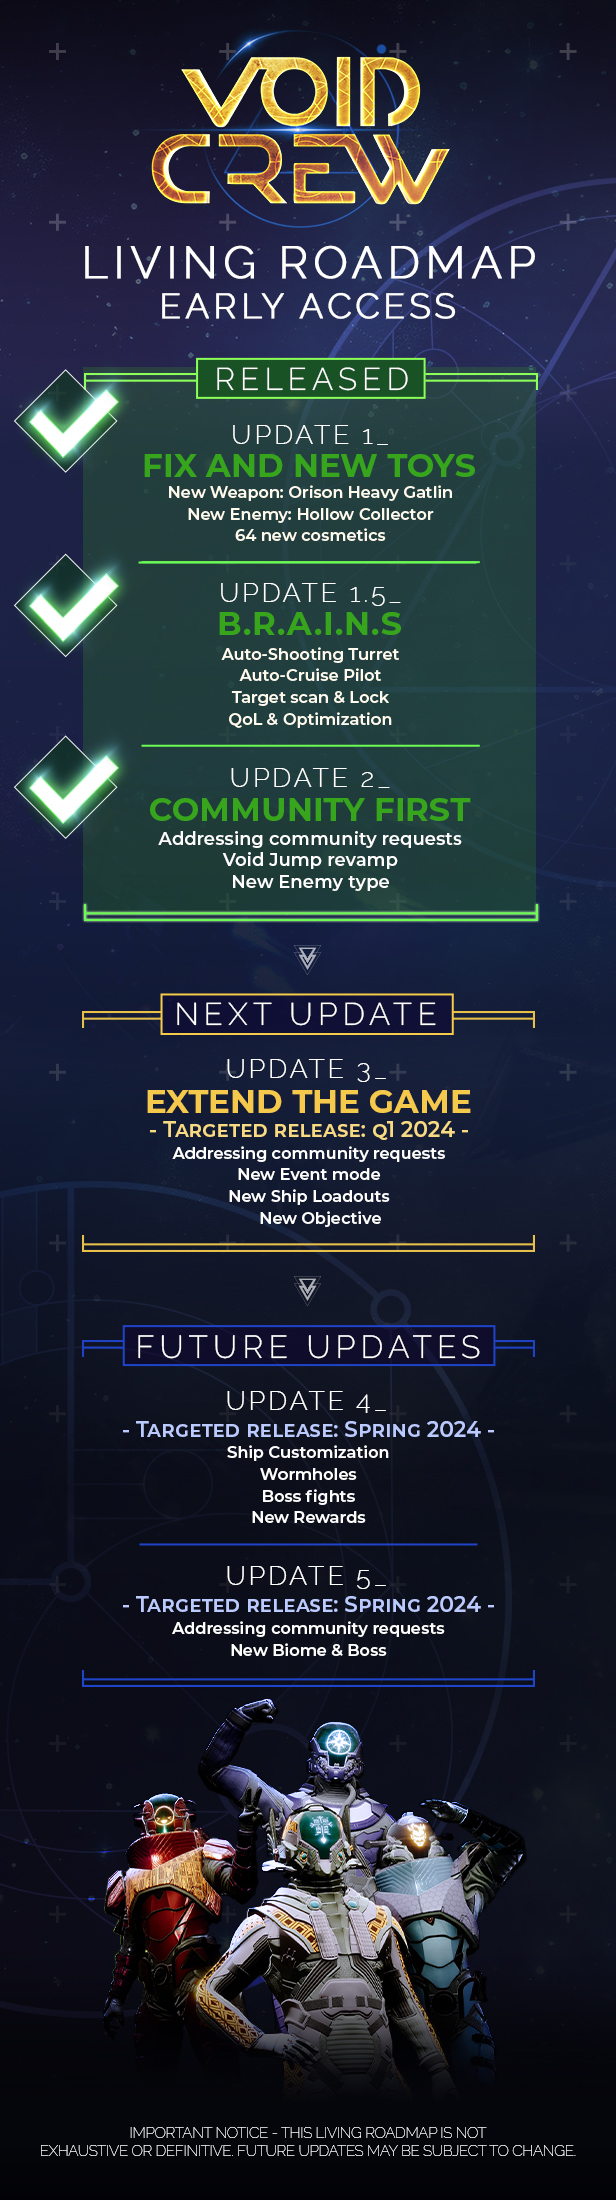 Updates to Invites: Joining Friends Just Got Easier - Announcements -  Developer Forum